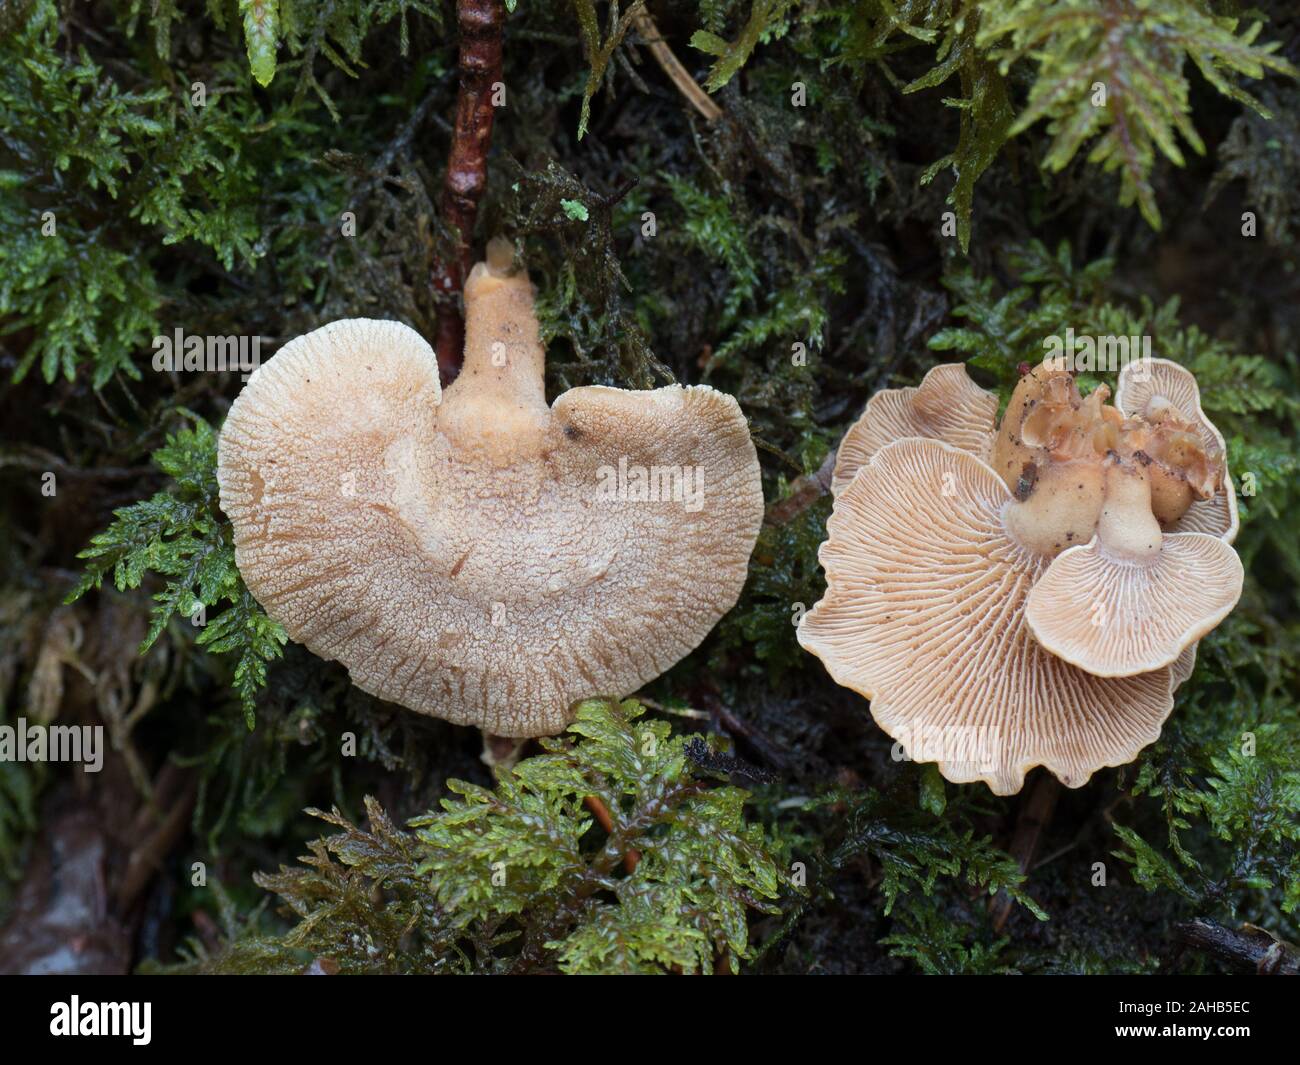 Panellus stipticus, commonly known as the bitter oyster, the luminescent panellus, or the stiptic fungus. Stock Photo